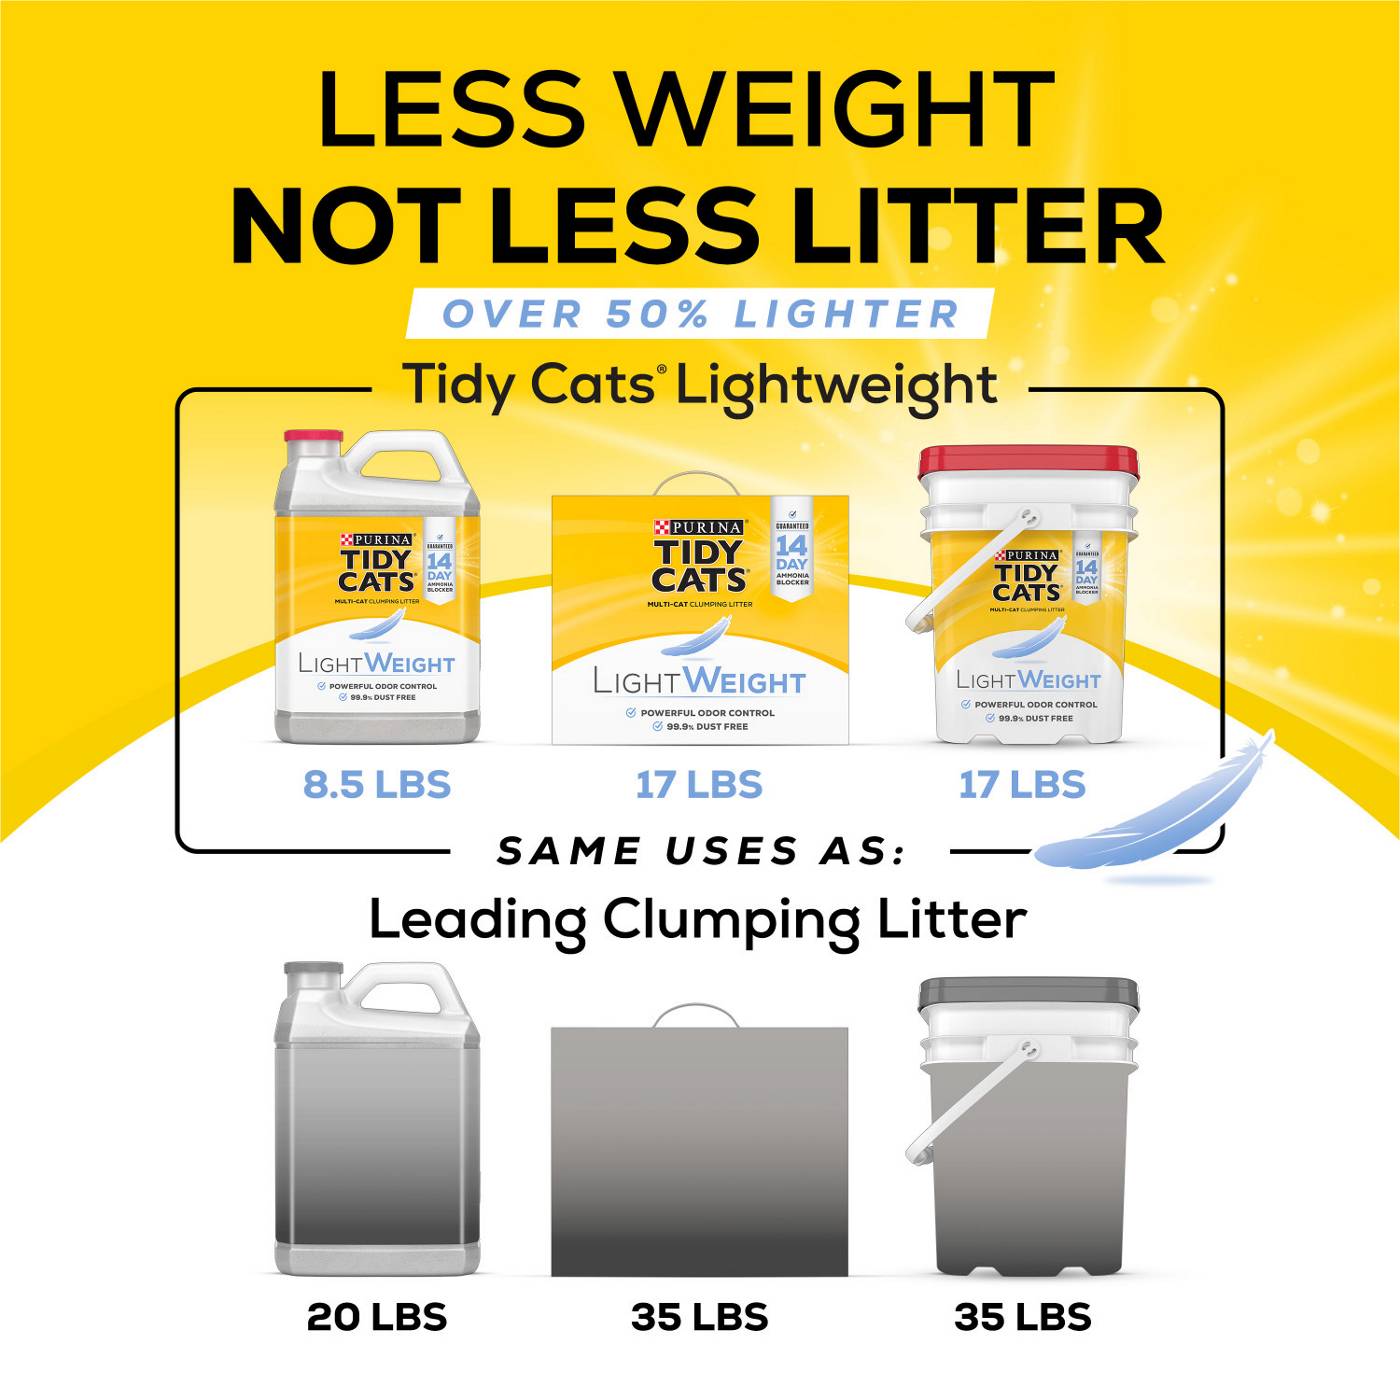 Tidy Cats Purina Tidy Cats Light Weight, Low Dust, Clumping Cat Litter, 24/7 Performance Multi Cat Litter; image 2 of 6